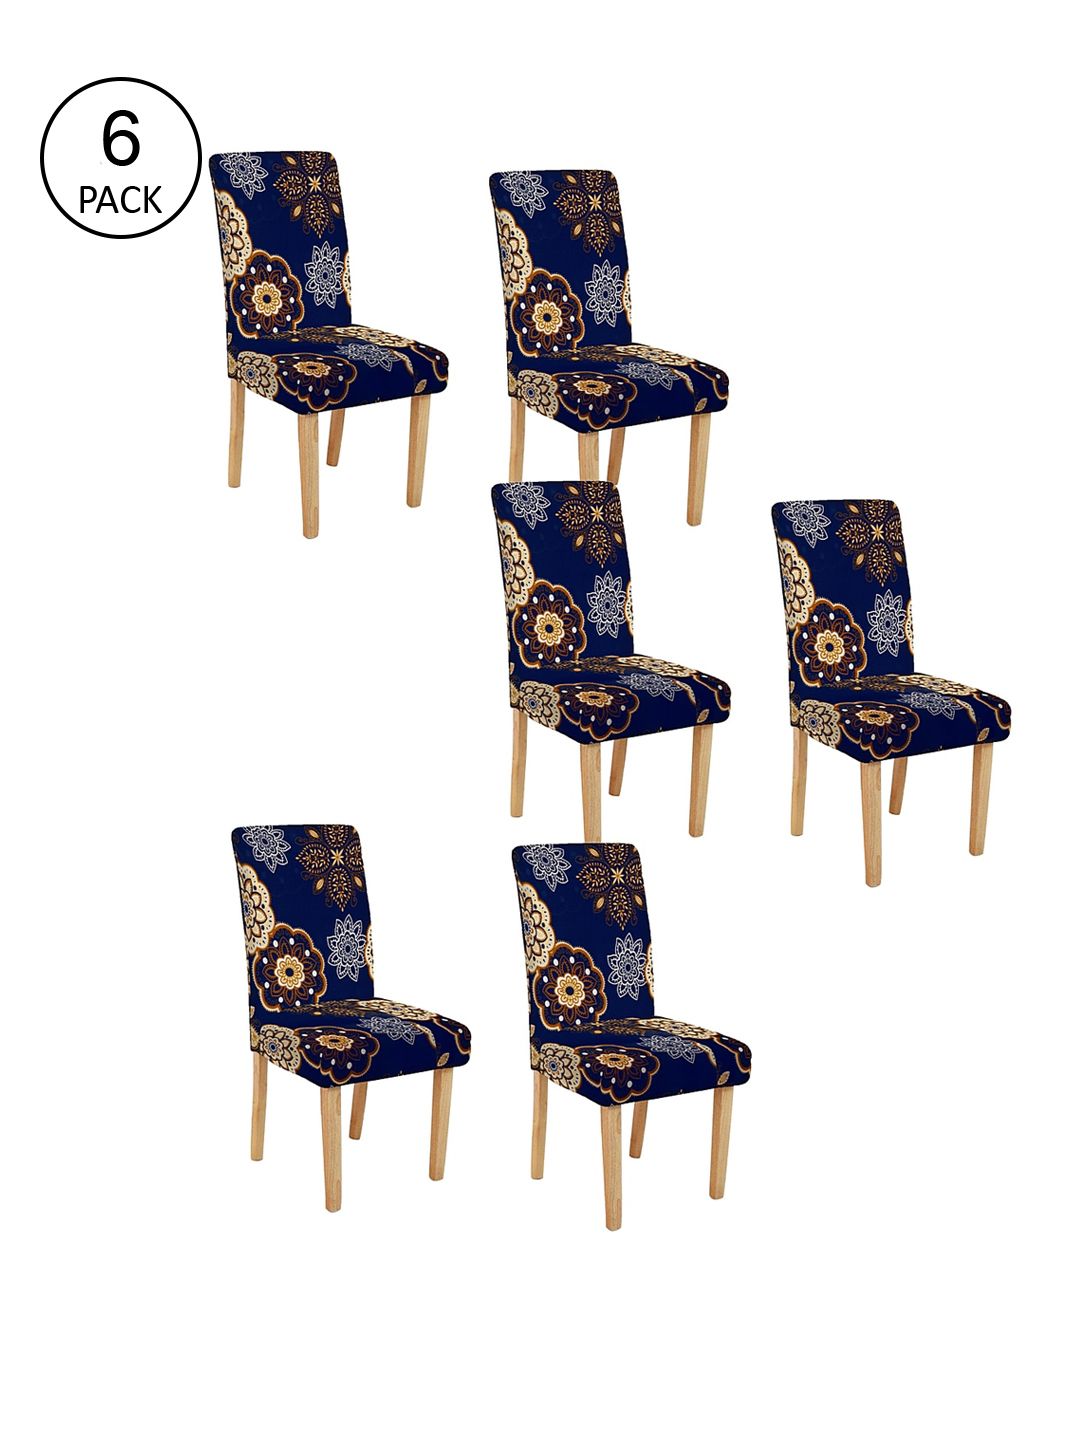 Cortina Set Of 6 Blue & White Printed Chair Covers Price in India